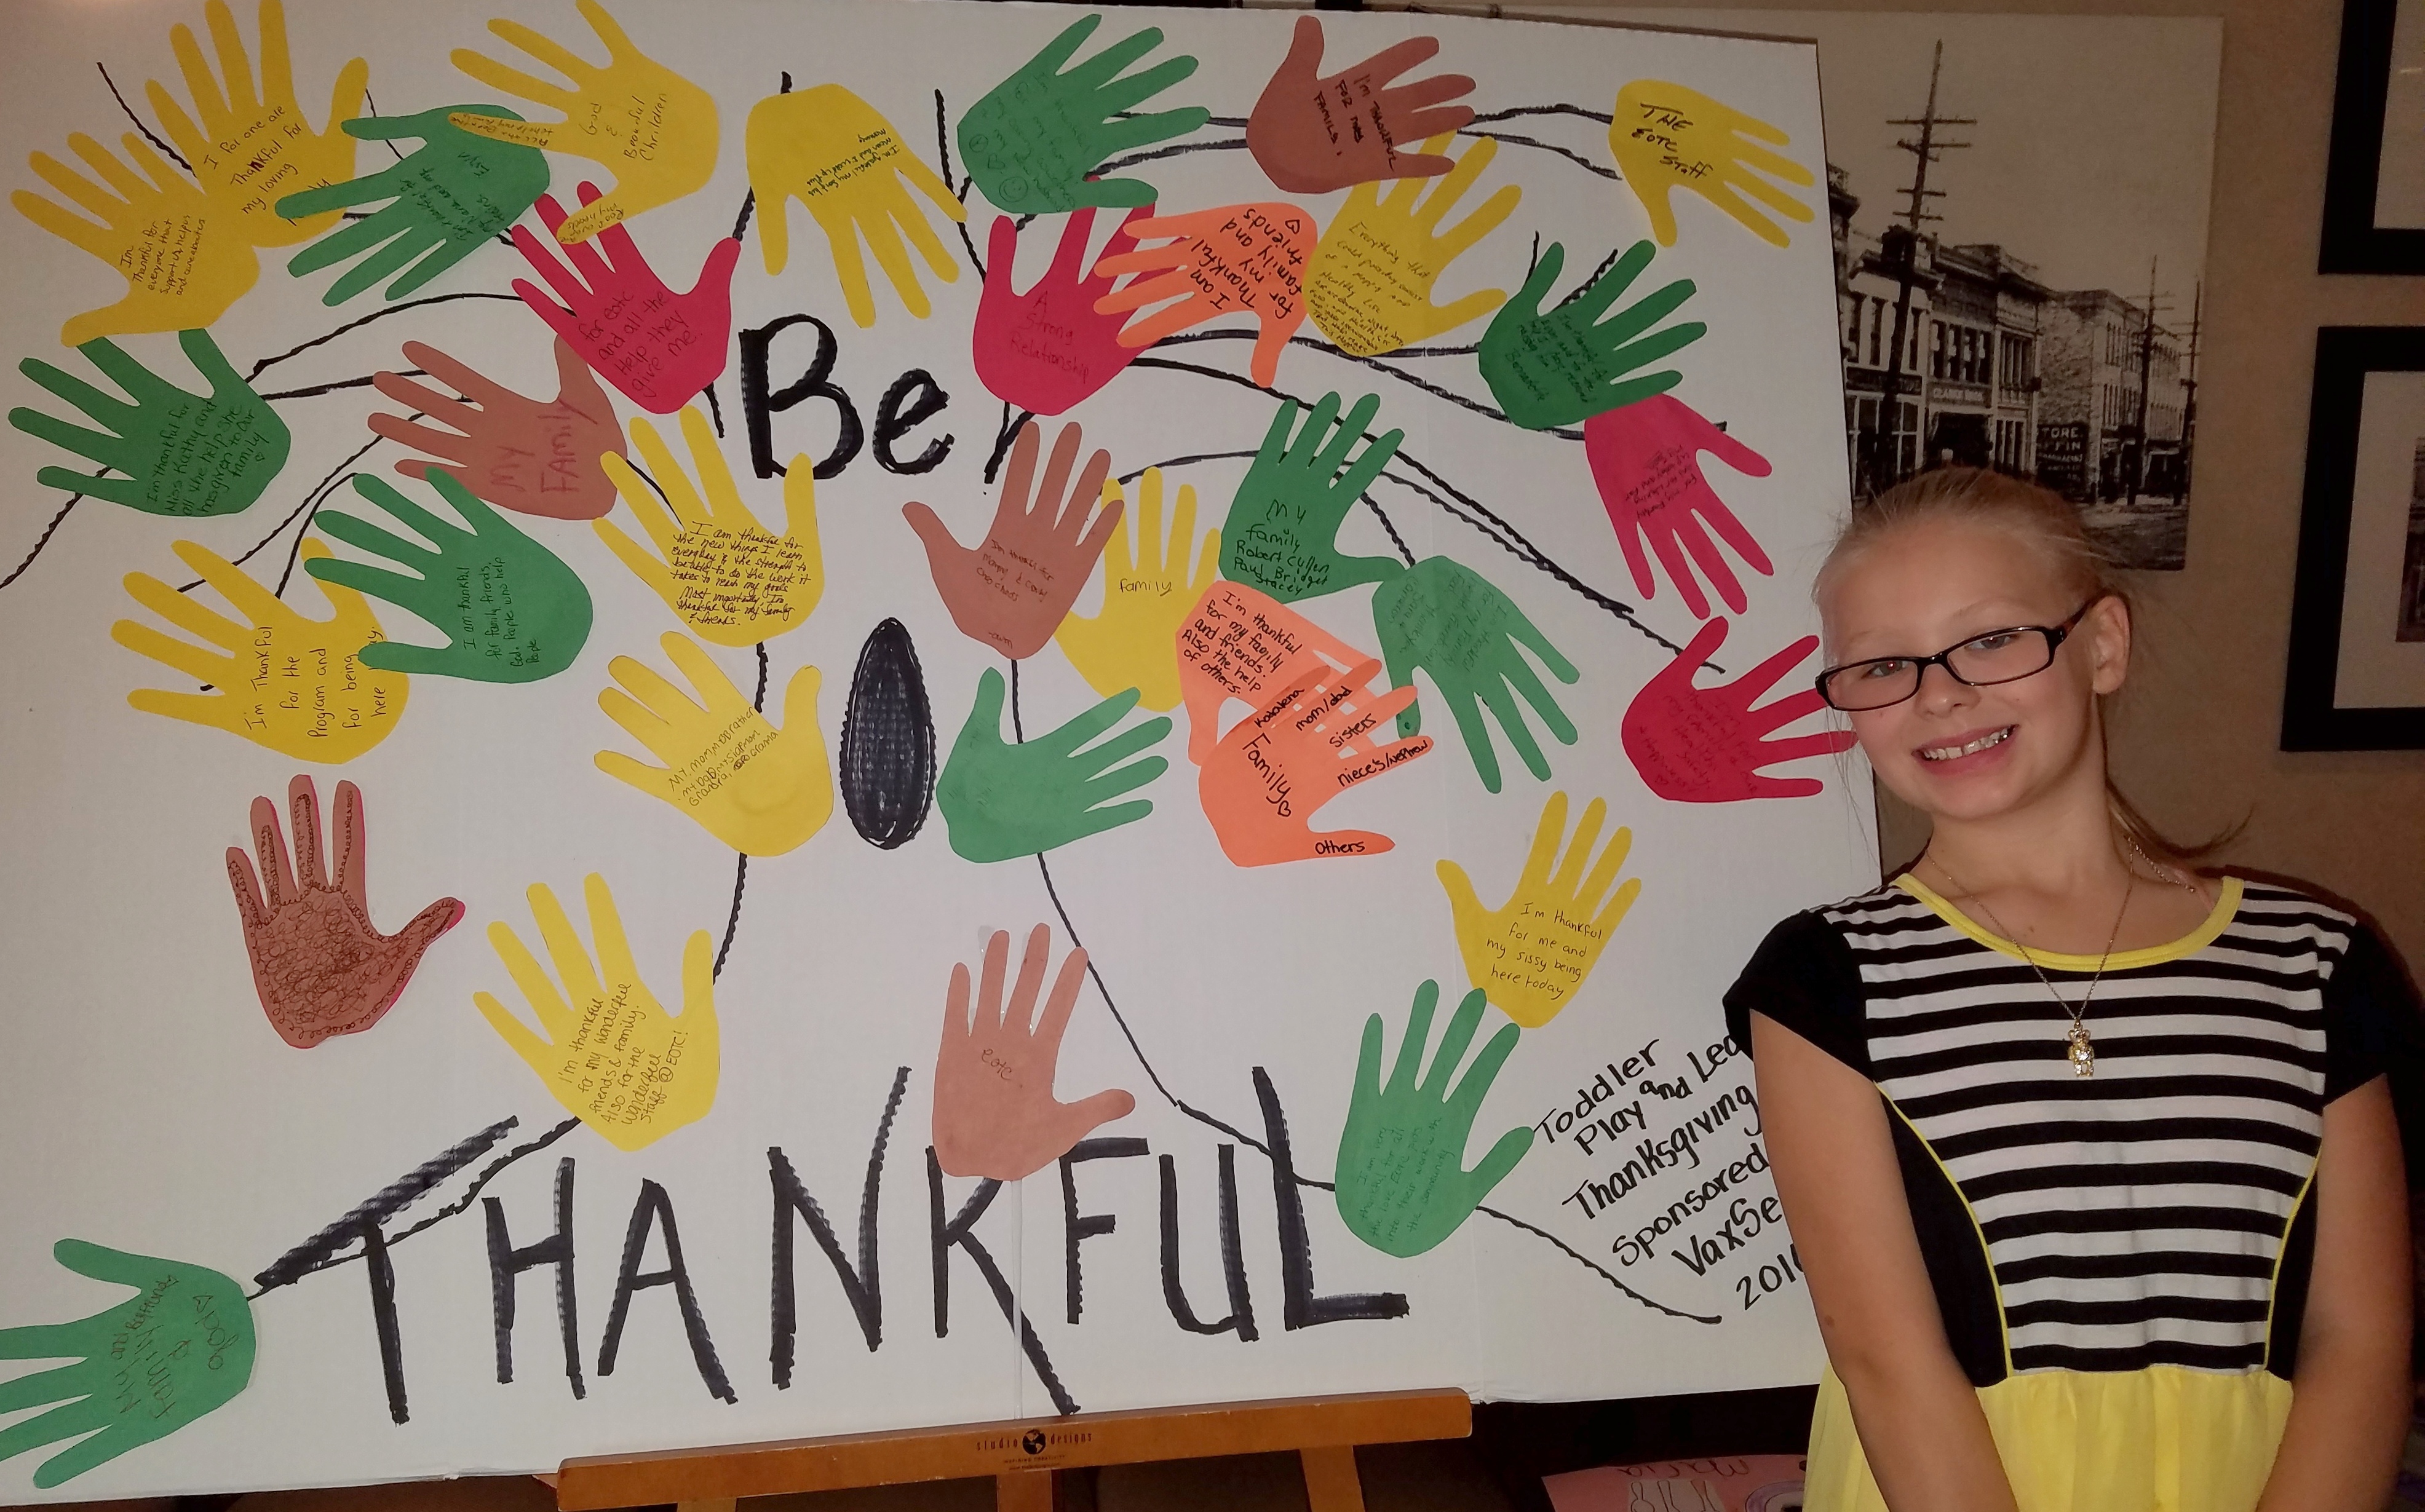 Program participants share all the wonderful things they are thankful for!